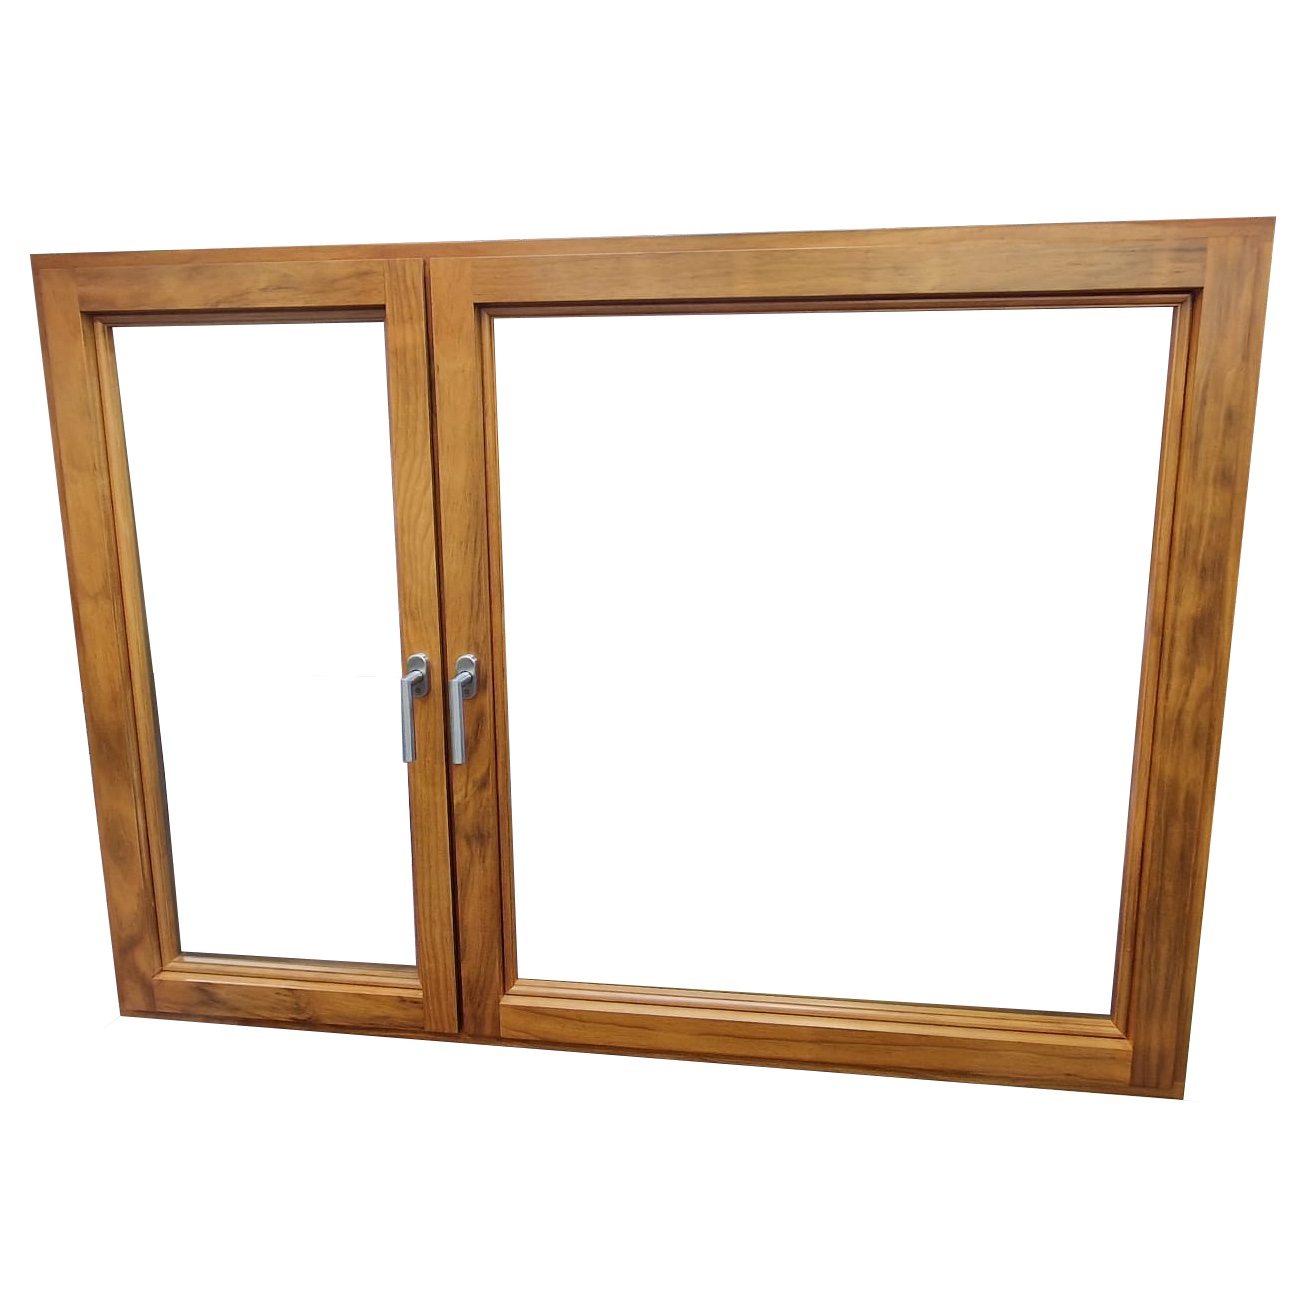 A very modern timber window with two tilt and turn casements.